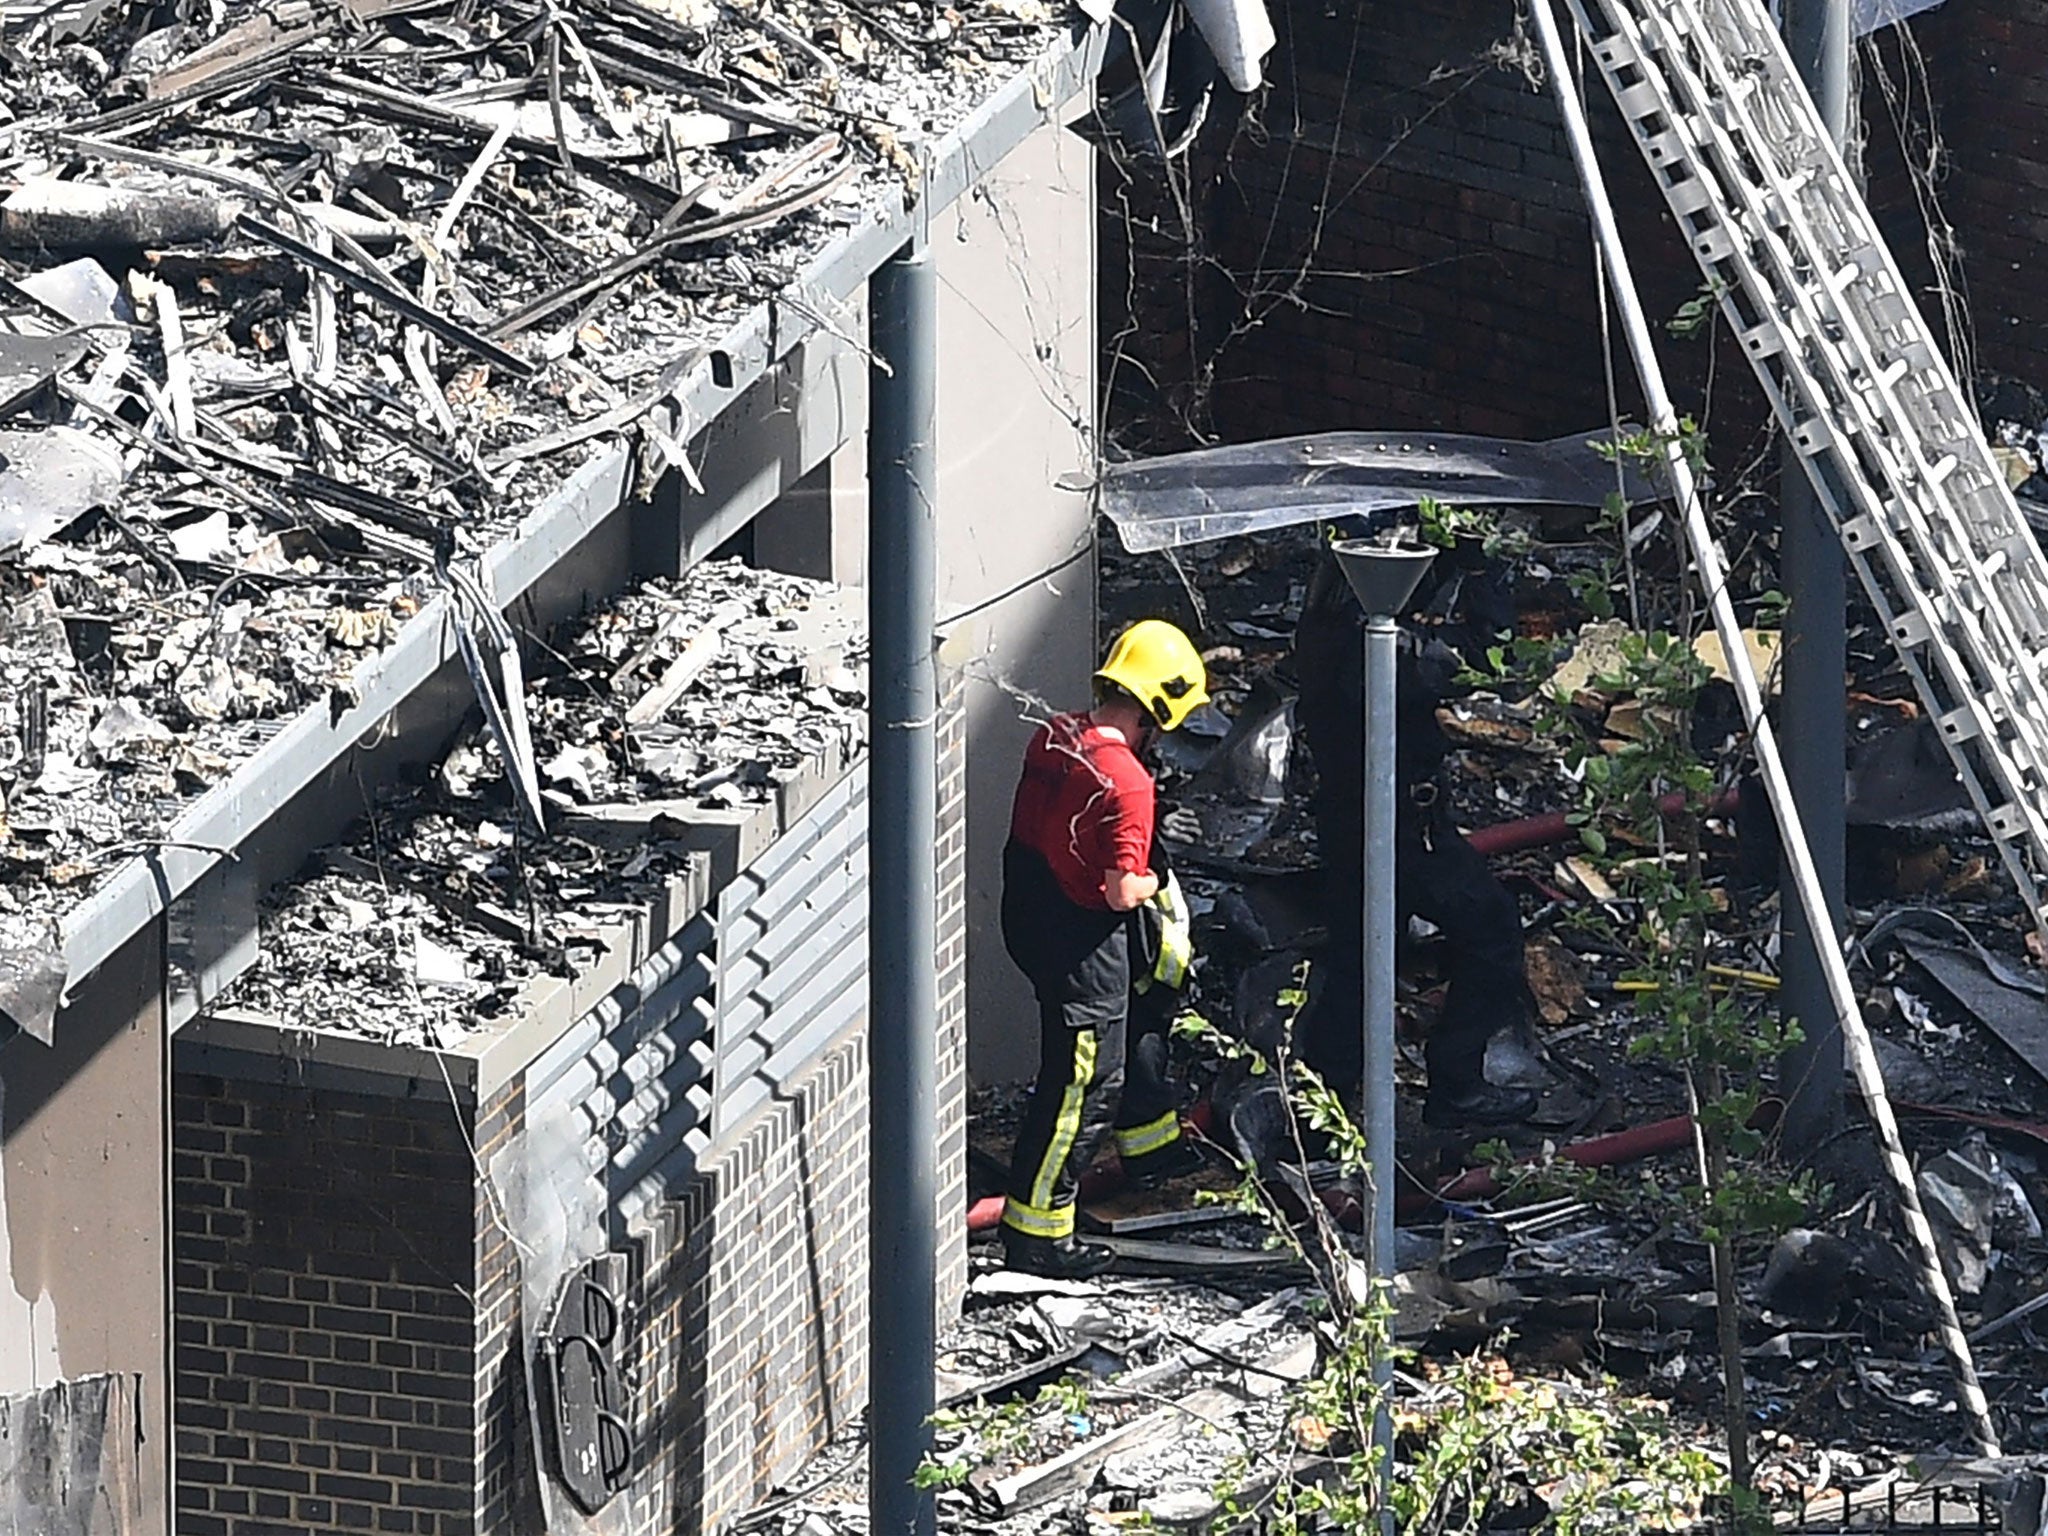 A firefighter is seen among the rubble in the aftermath of a fire at Grenfell Tower